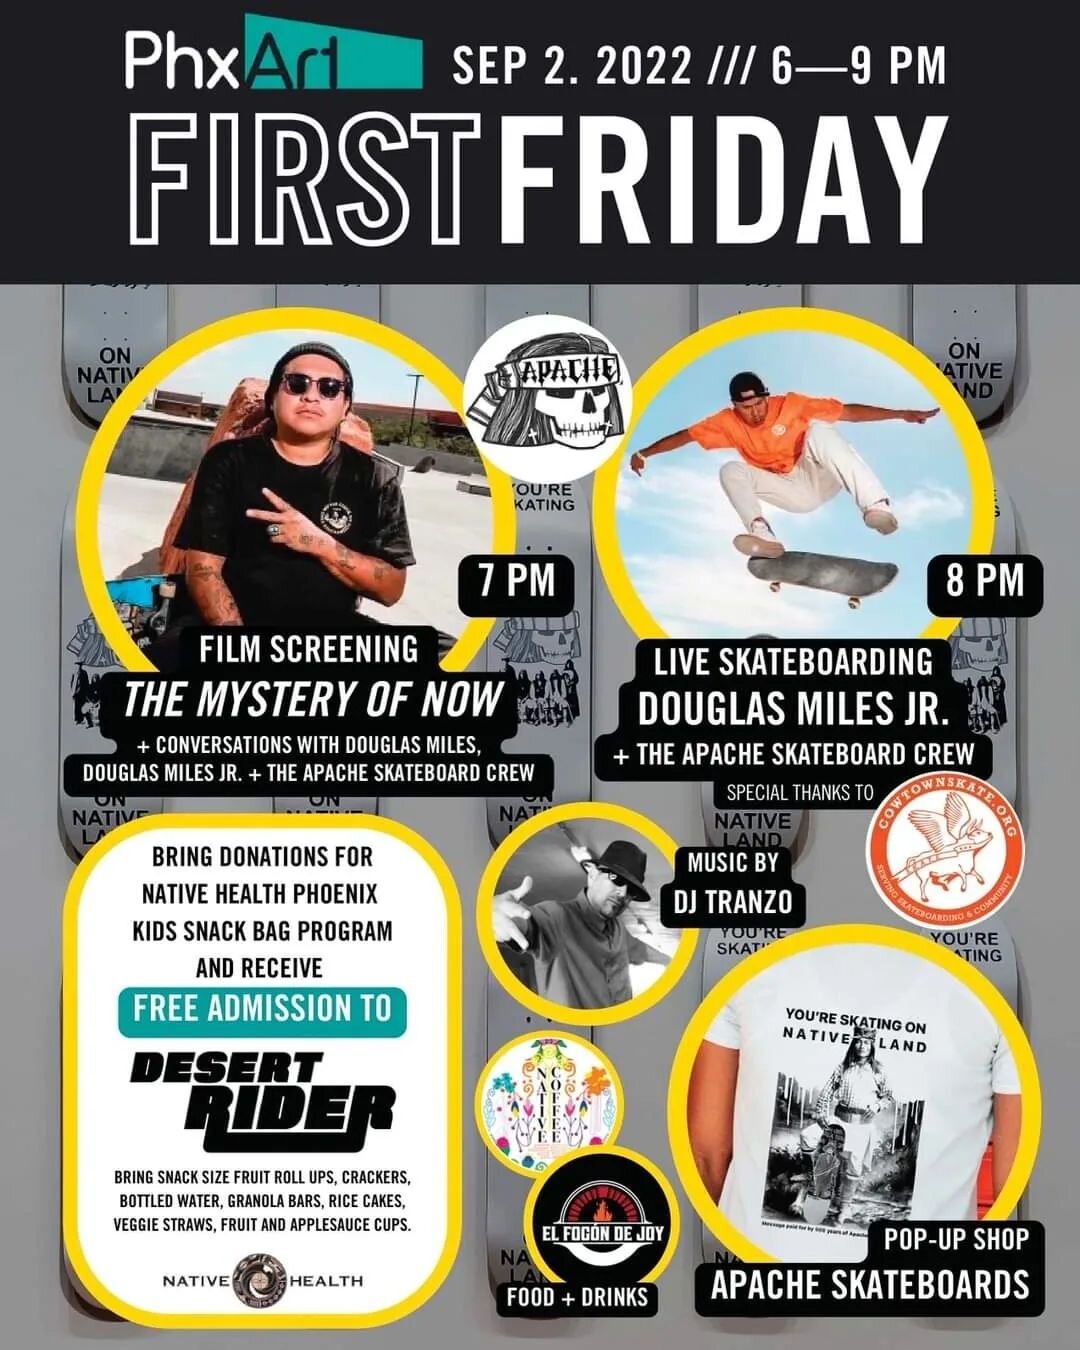 NSAA muralist @dmiles1_apache  and @instapache1 will be having a special event at the Phoenix Art Museum this First Friday. If you bring a donation admission to the Desert Rider is free. If you have not seen this exhibit, come check it out. It is goo